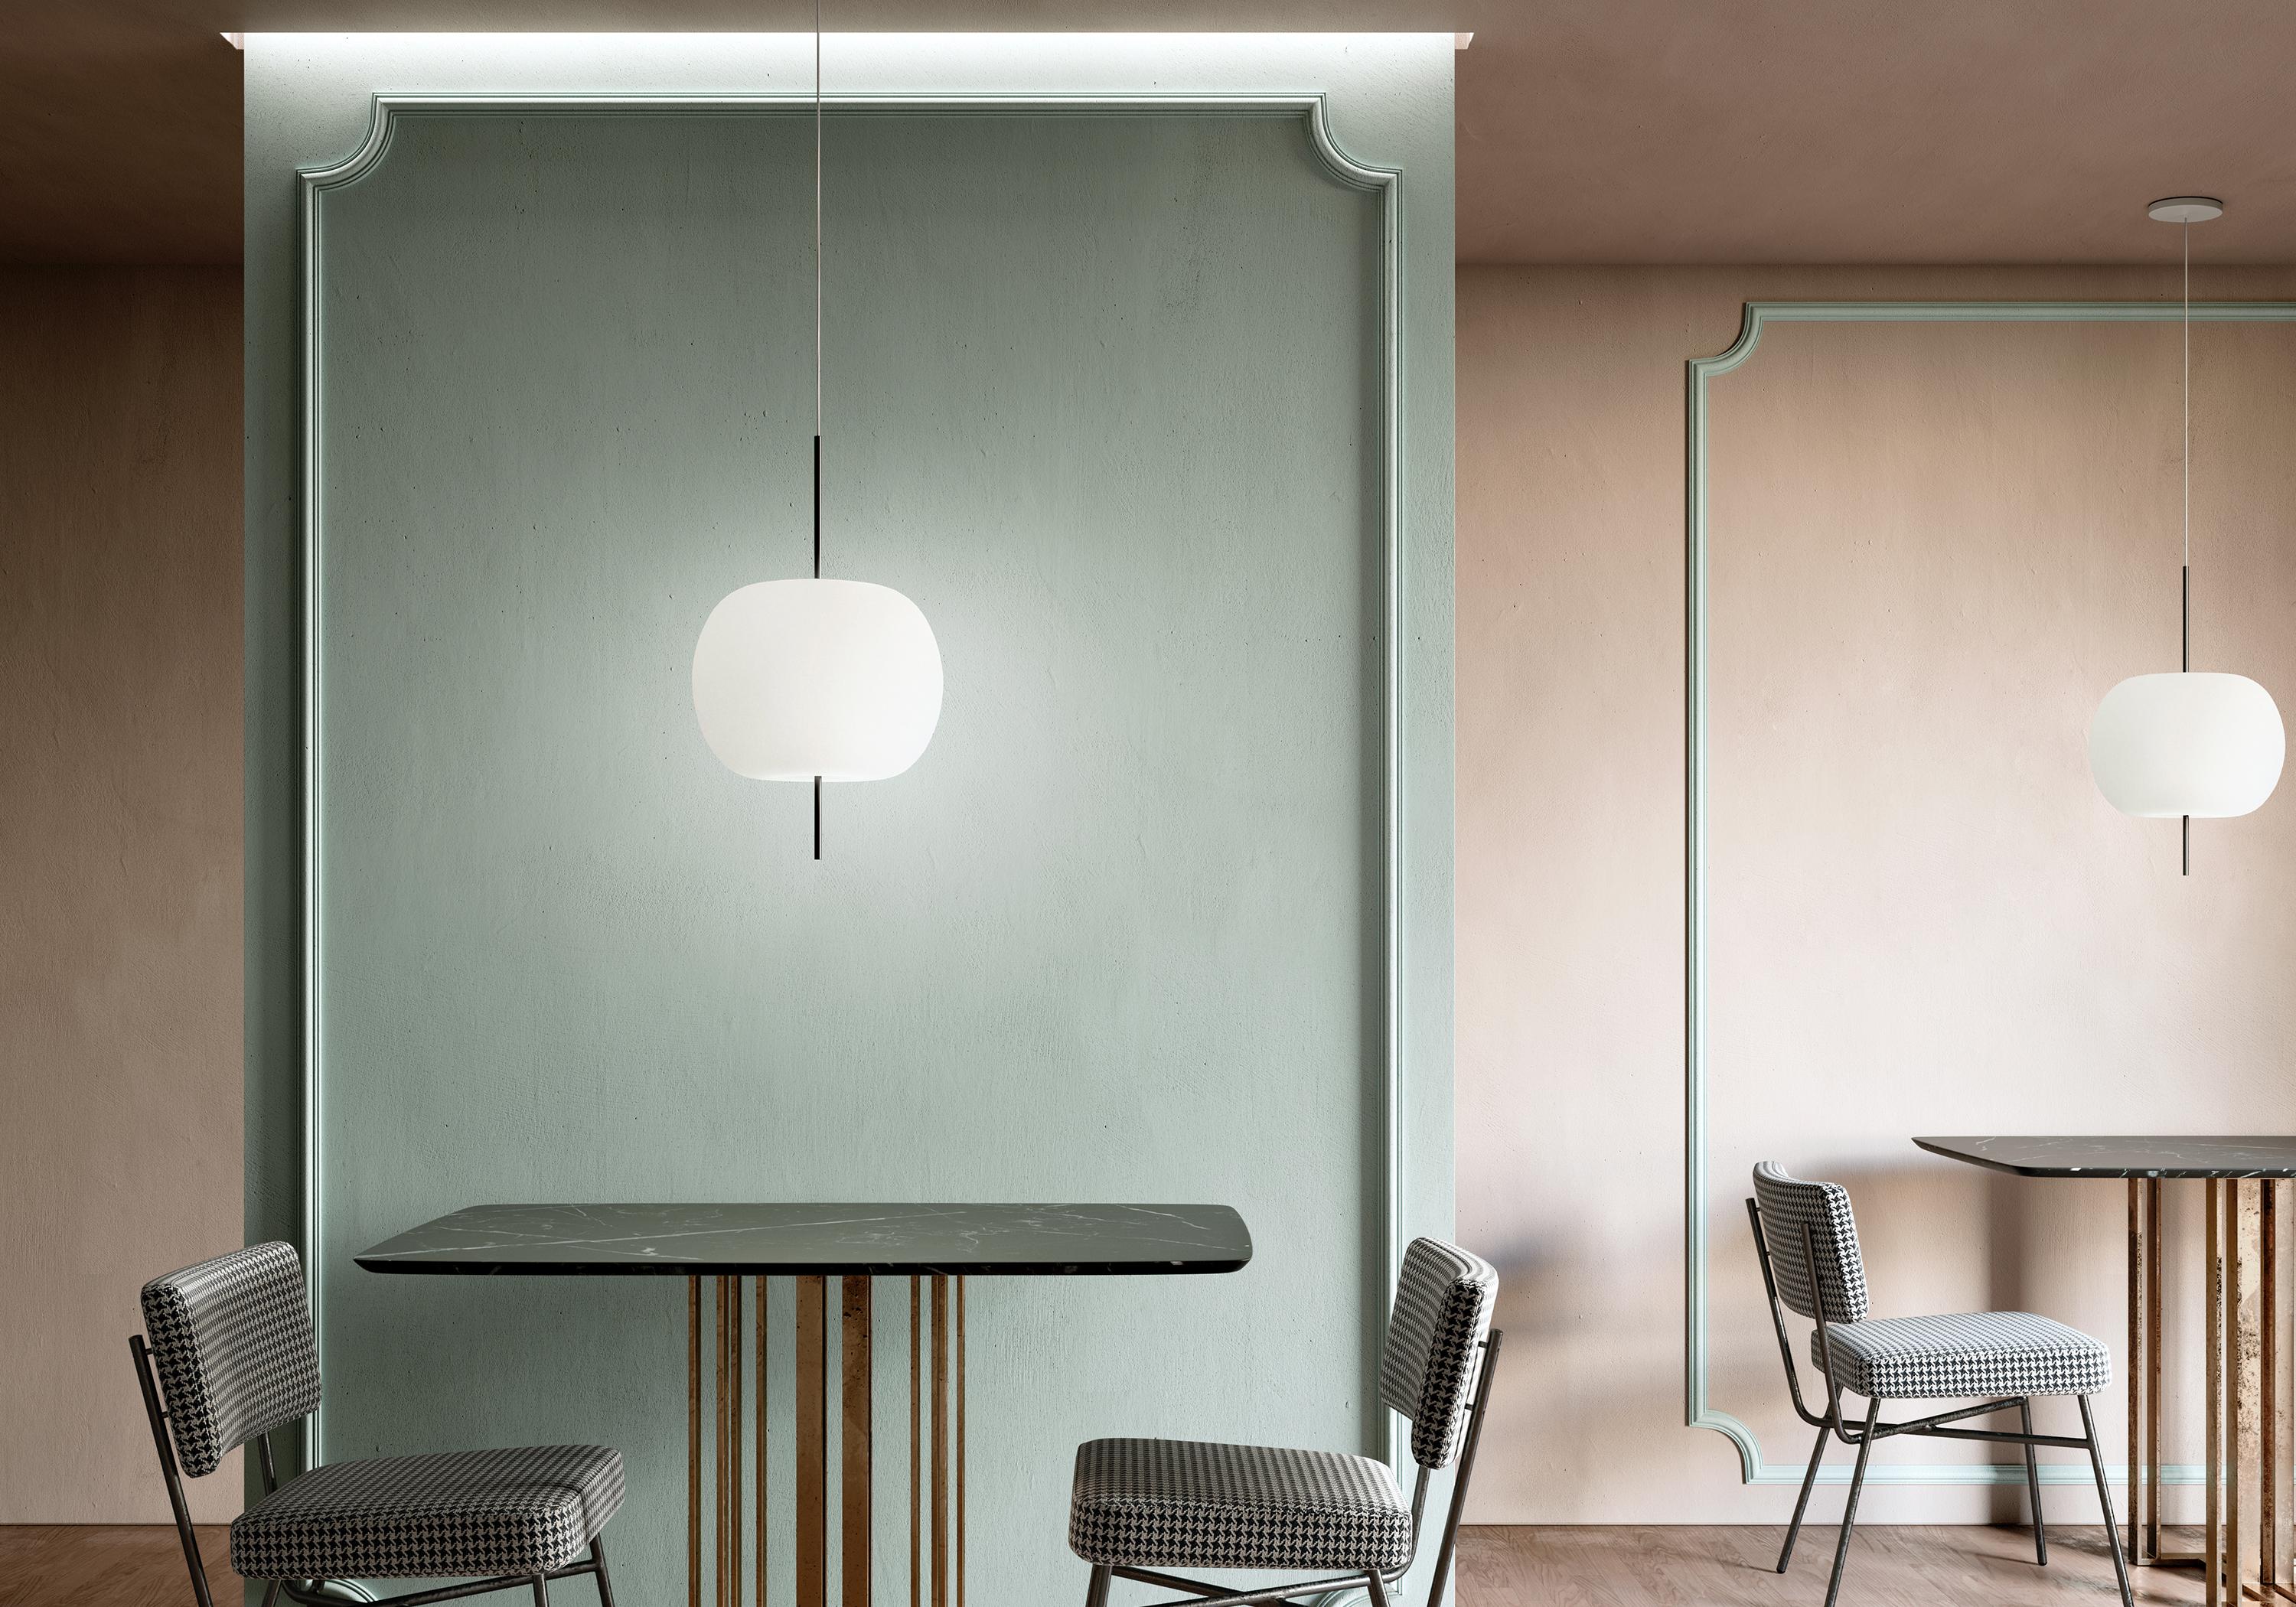 Kushi 16 G9 suspension copper finish

A play on opposites, unexpected equilibrium. Soft, natural curves for the glass diffuser and a simple metal line which passes through and completes it. A convergence of shapes which rest gently on walls and